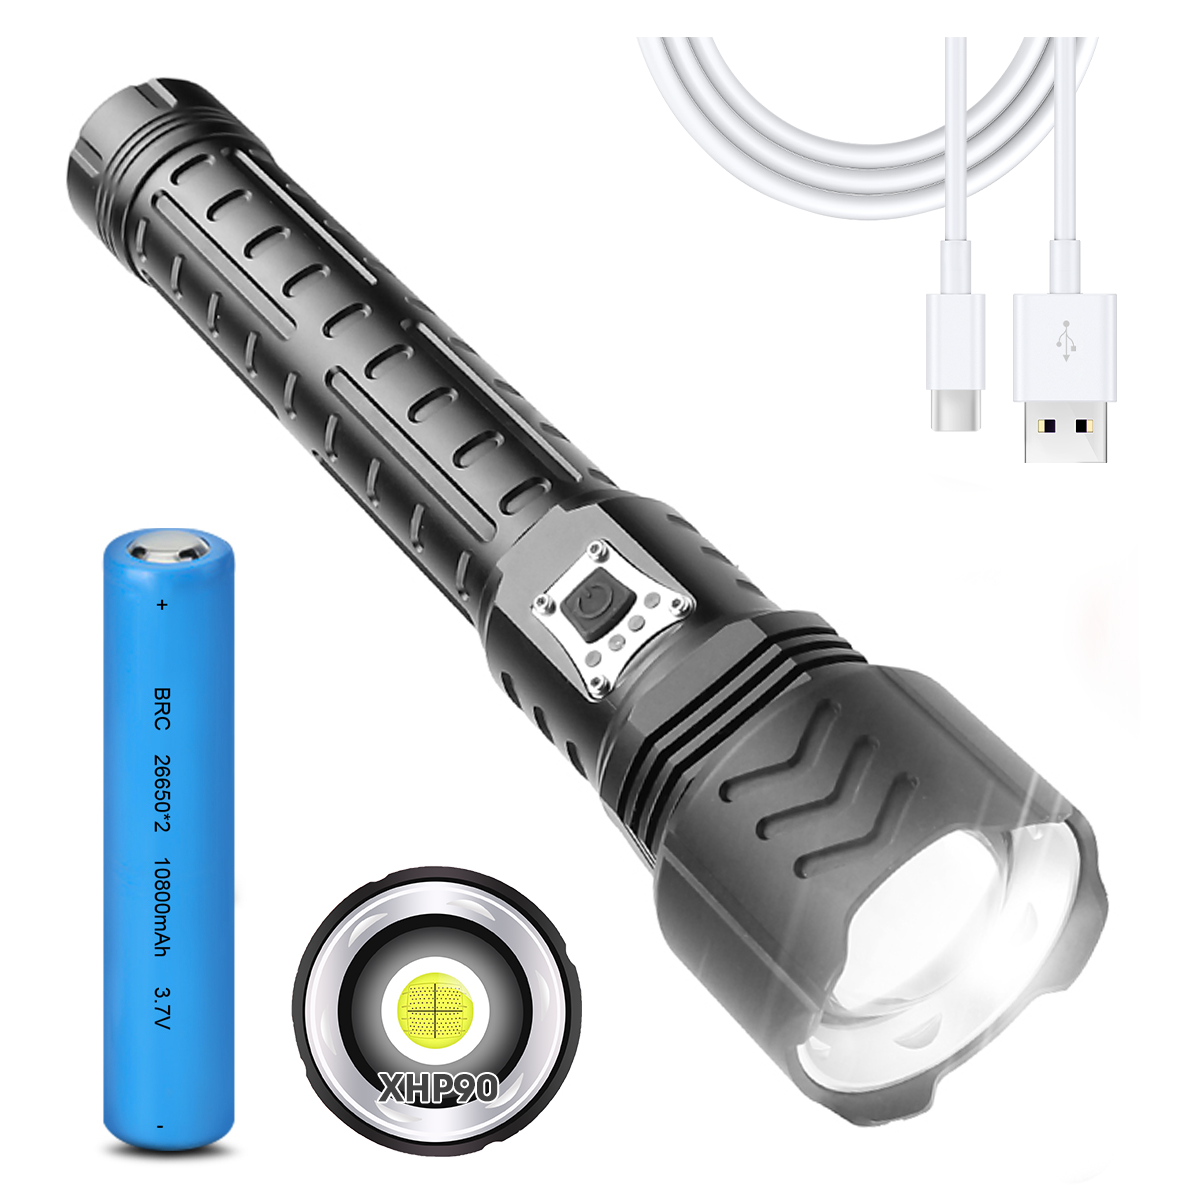 Portable USB Rechargeable 5 Modes & Zoomable P70.2 Tactical Flashlight High Brightness Waterproof